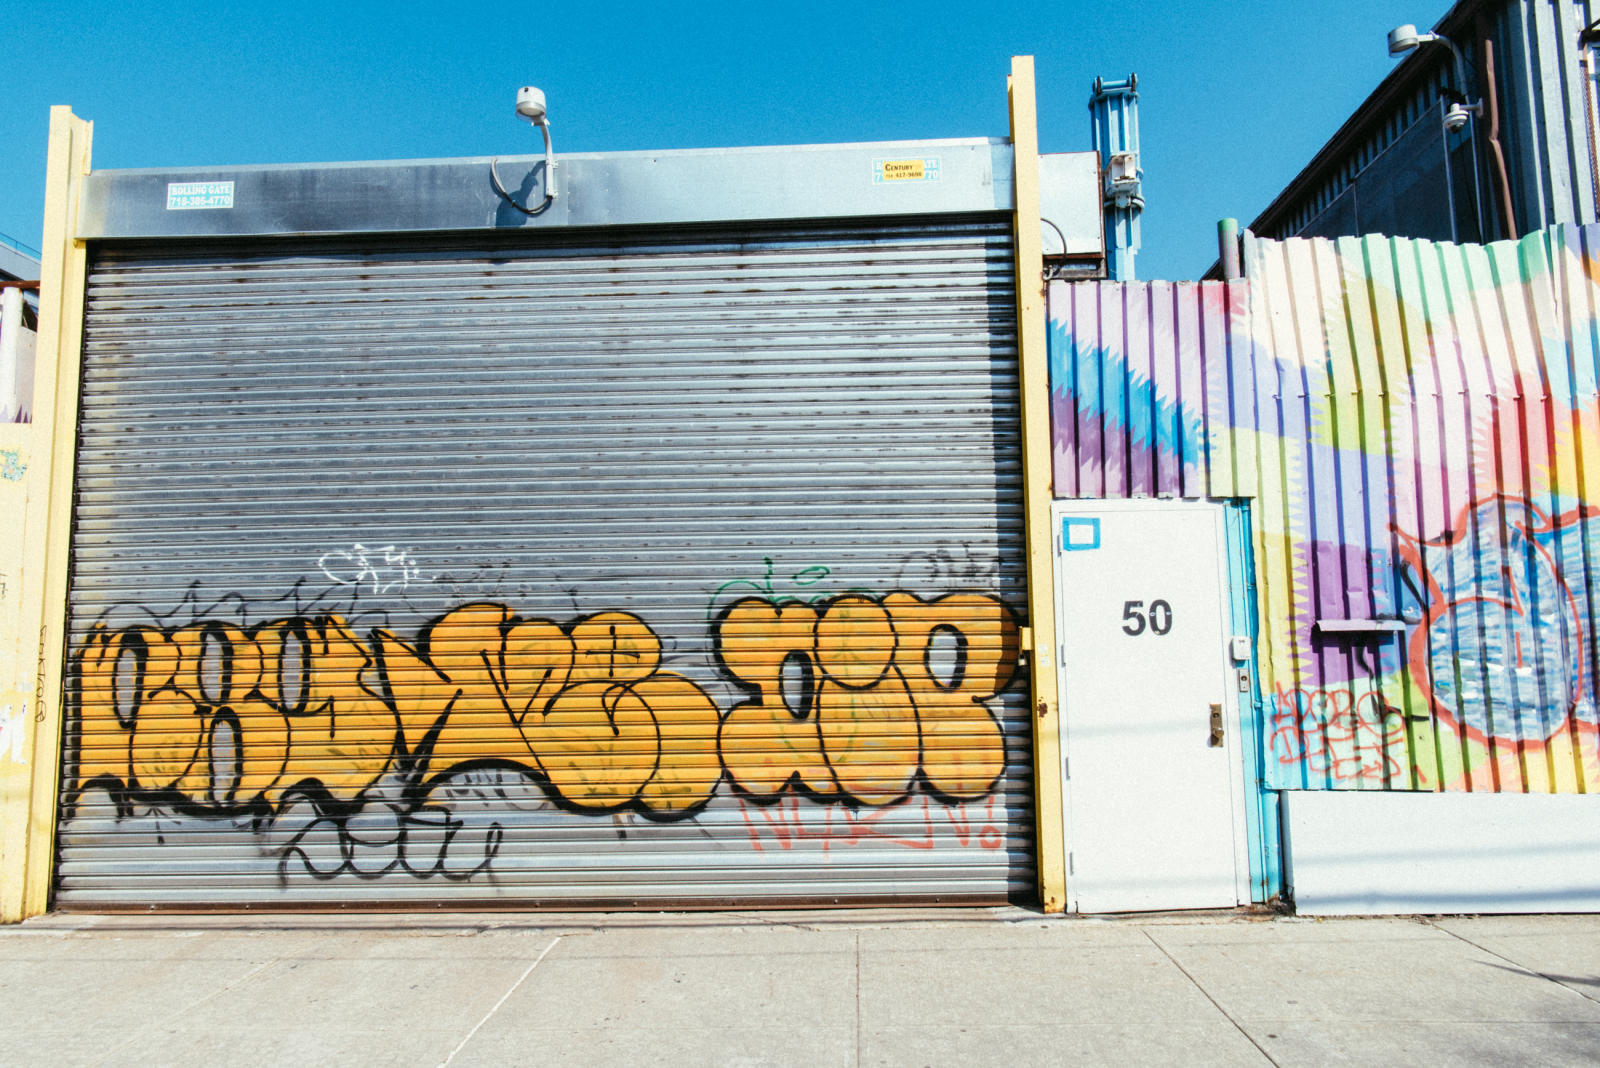 In Bushwick, there are murals everywhere.